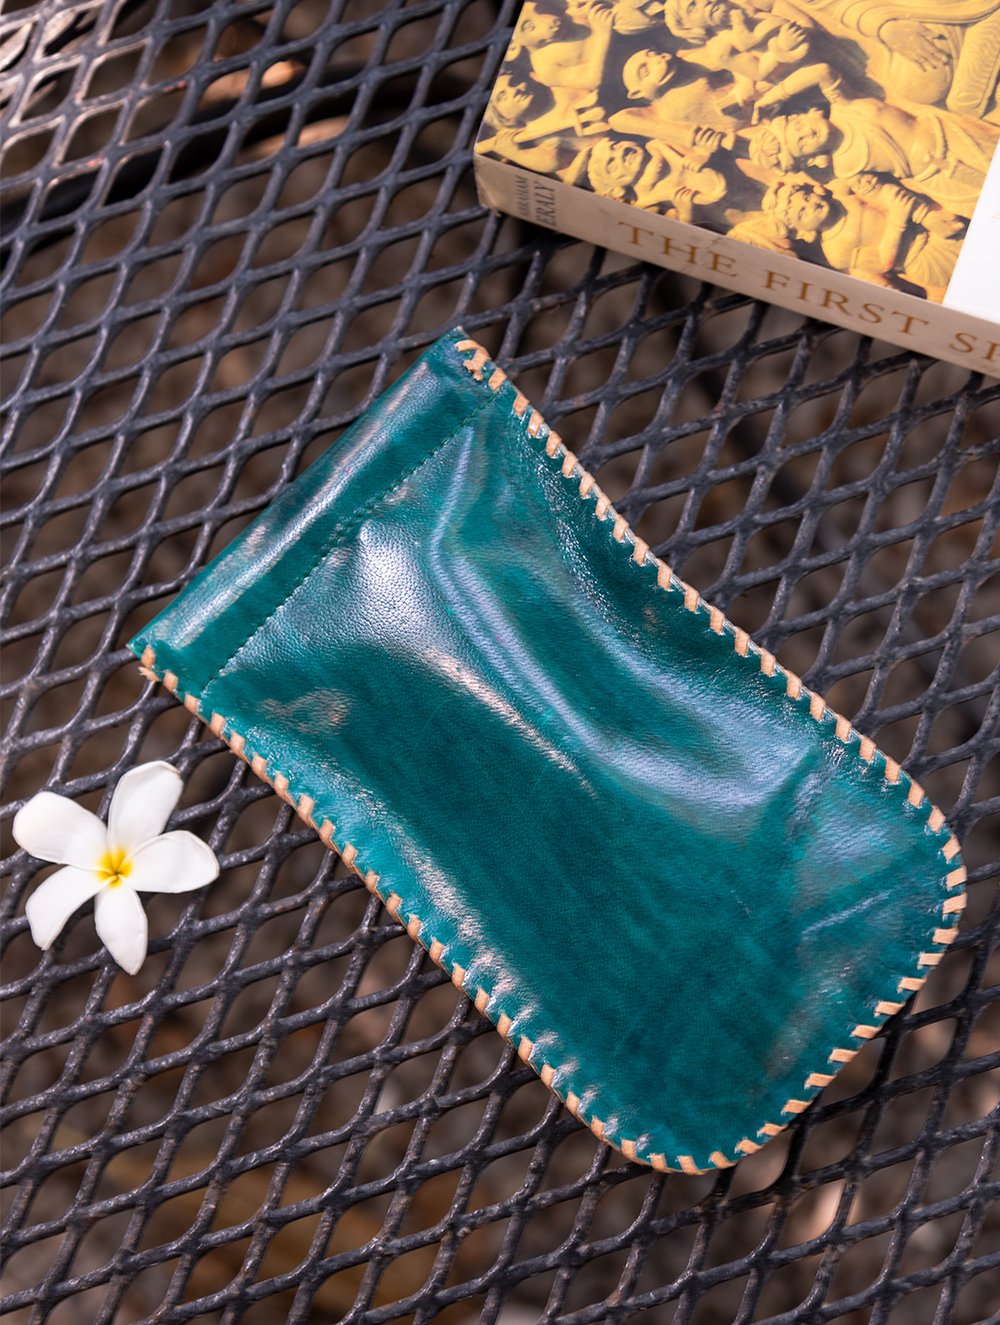 Load image into Gallery viewer, Handcrafted Leather Spectacle Case With Hand Stitch Detail